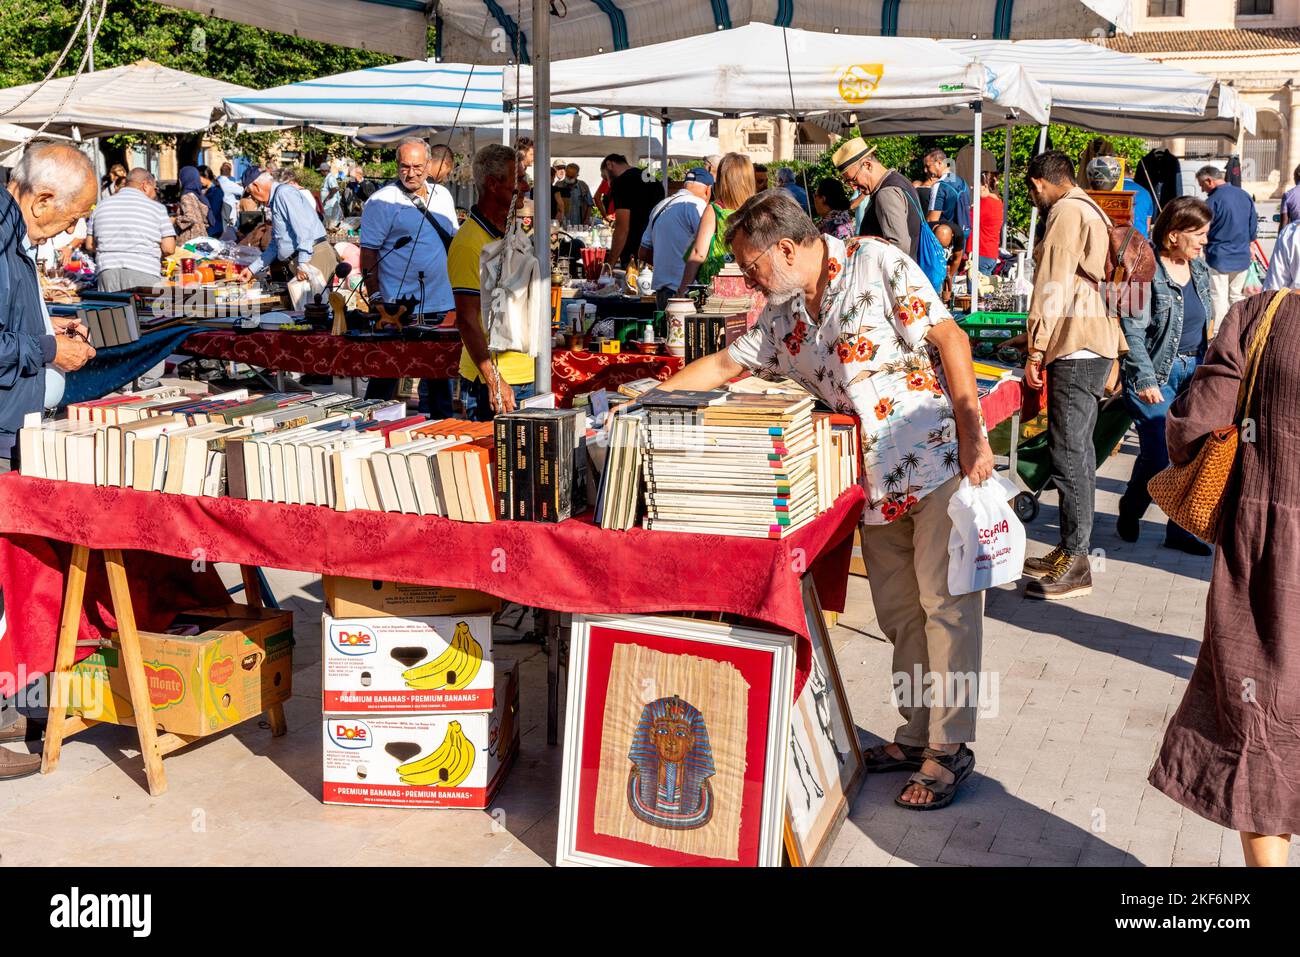 Local People Browsing Books At The Sunday Antiques Market In Piazza Santa Lucia, Syracuse (Siracusa), Sicily, Italy Stock Photo